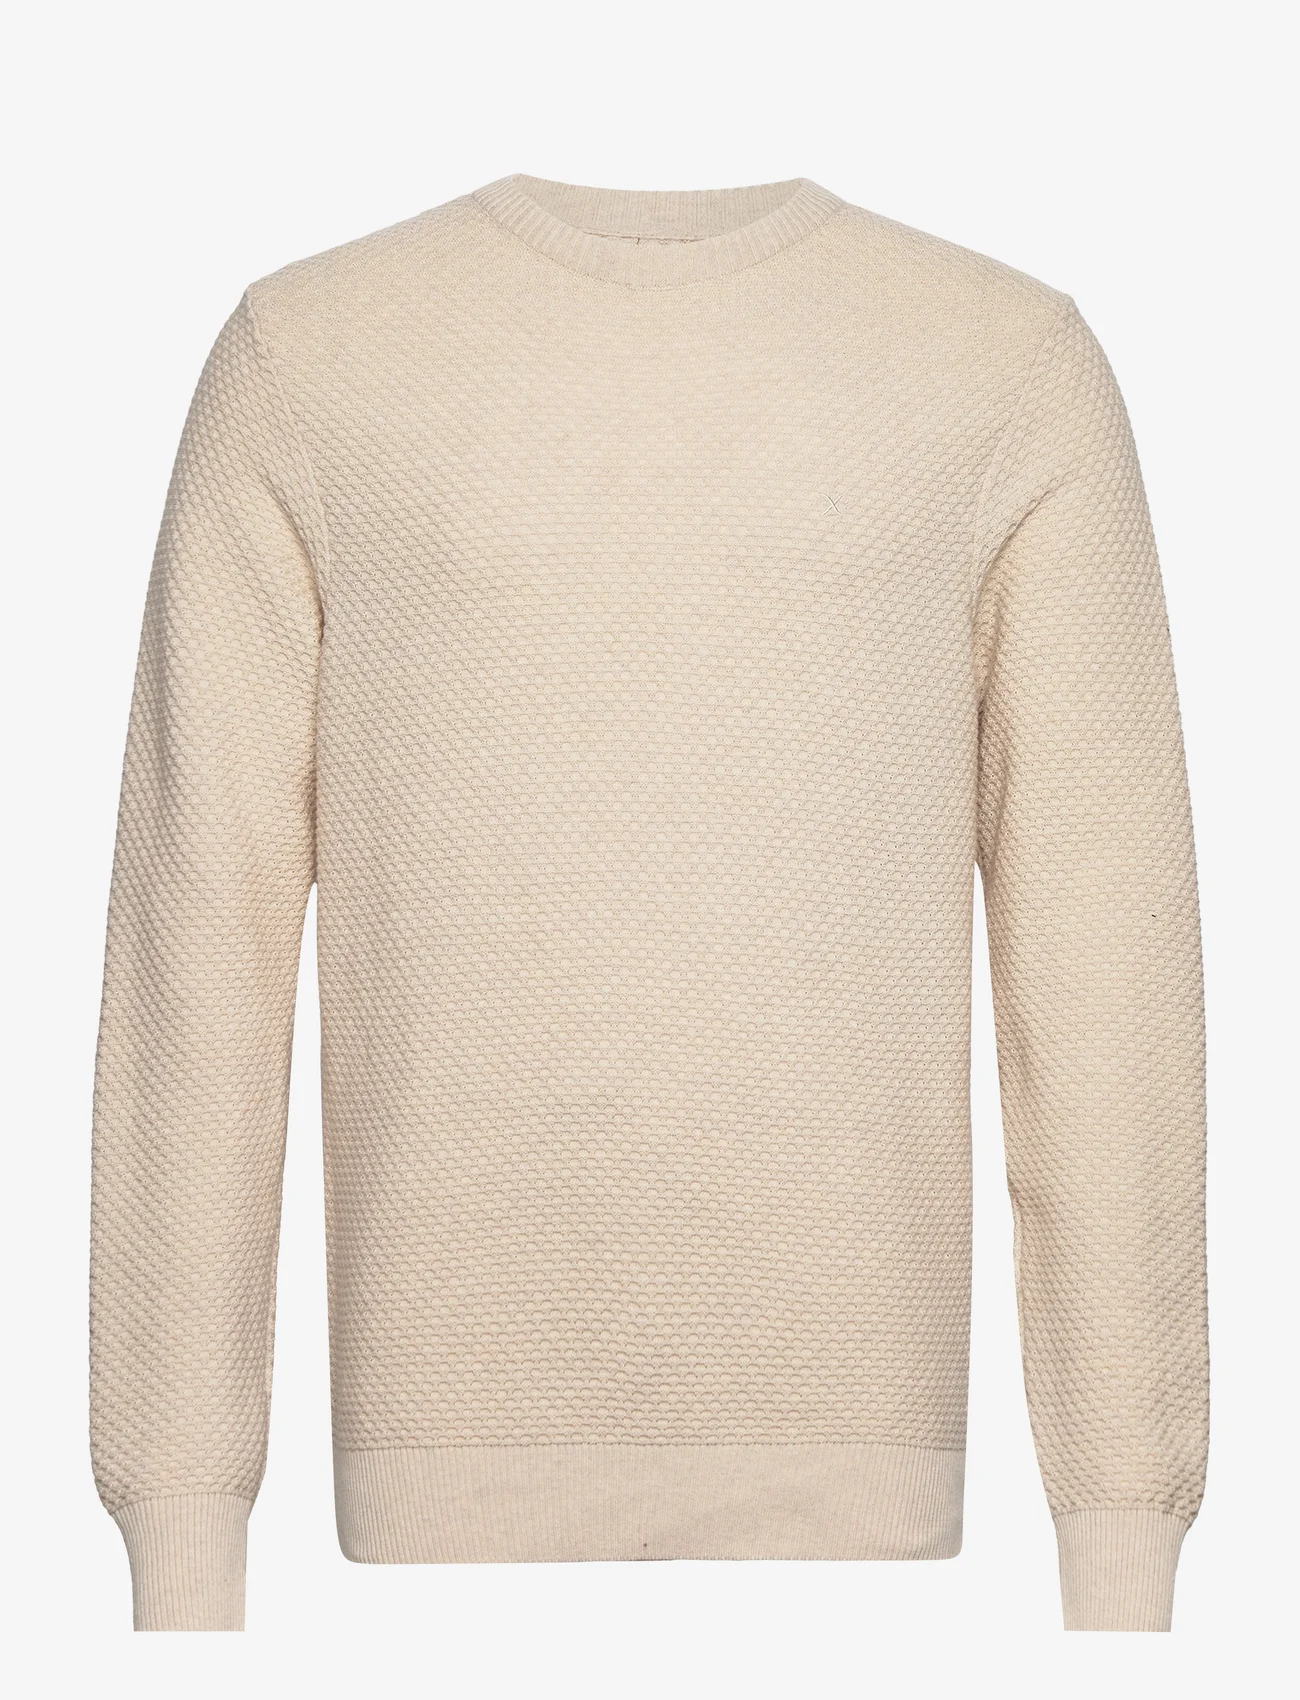 Clean Cut Copenhagen - Oliver Recycled O-neck Knit - rundhals - sand - 0